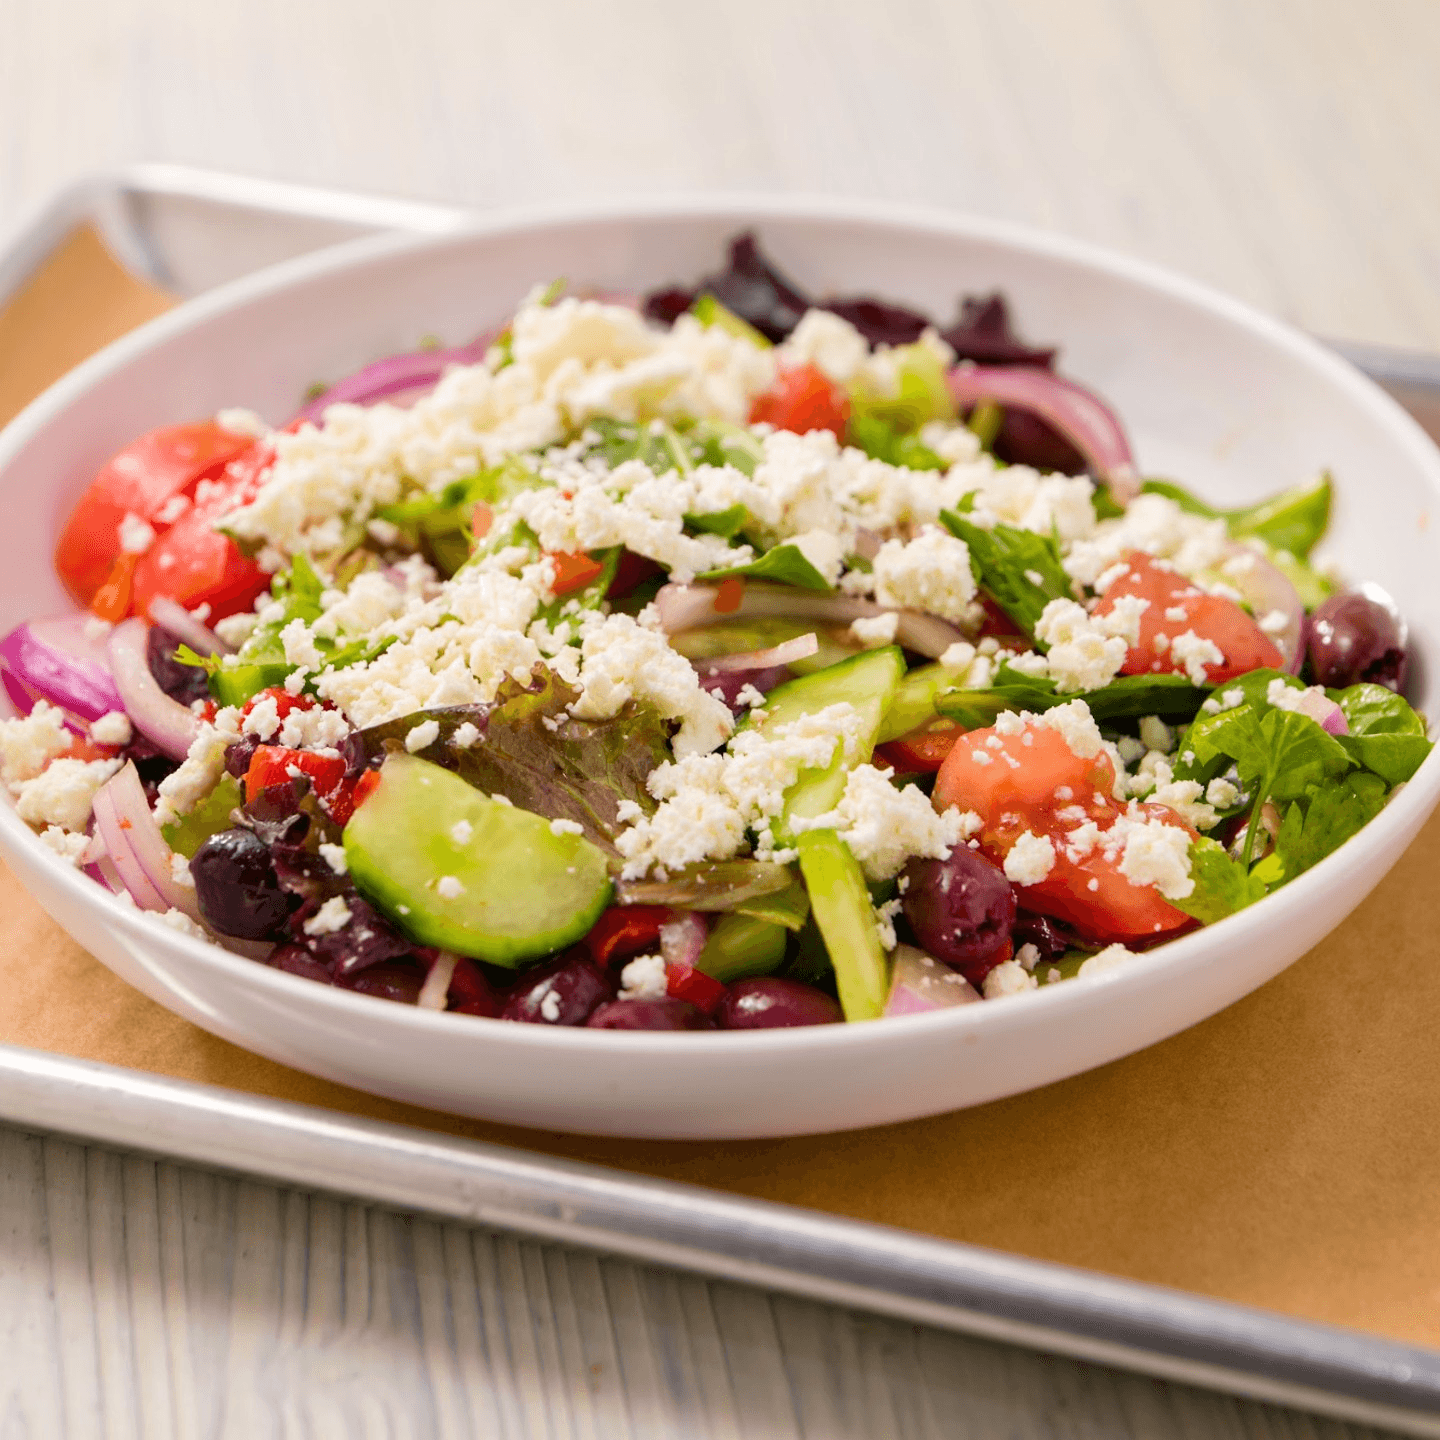 Harmony on a Plate: Our Signature House Meal Salad